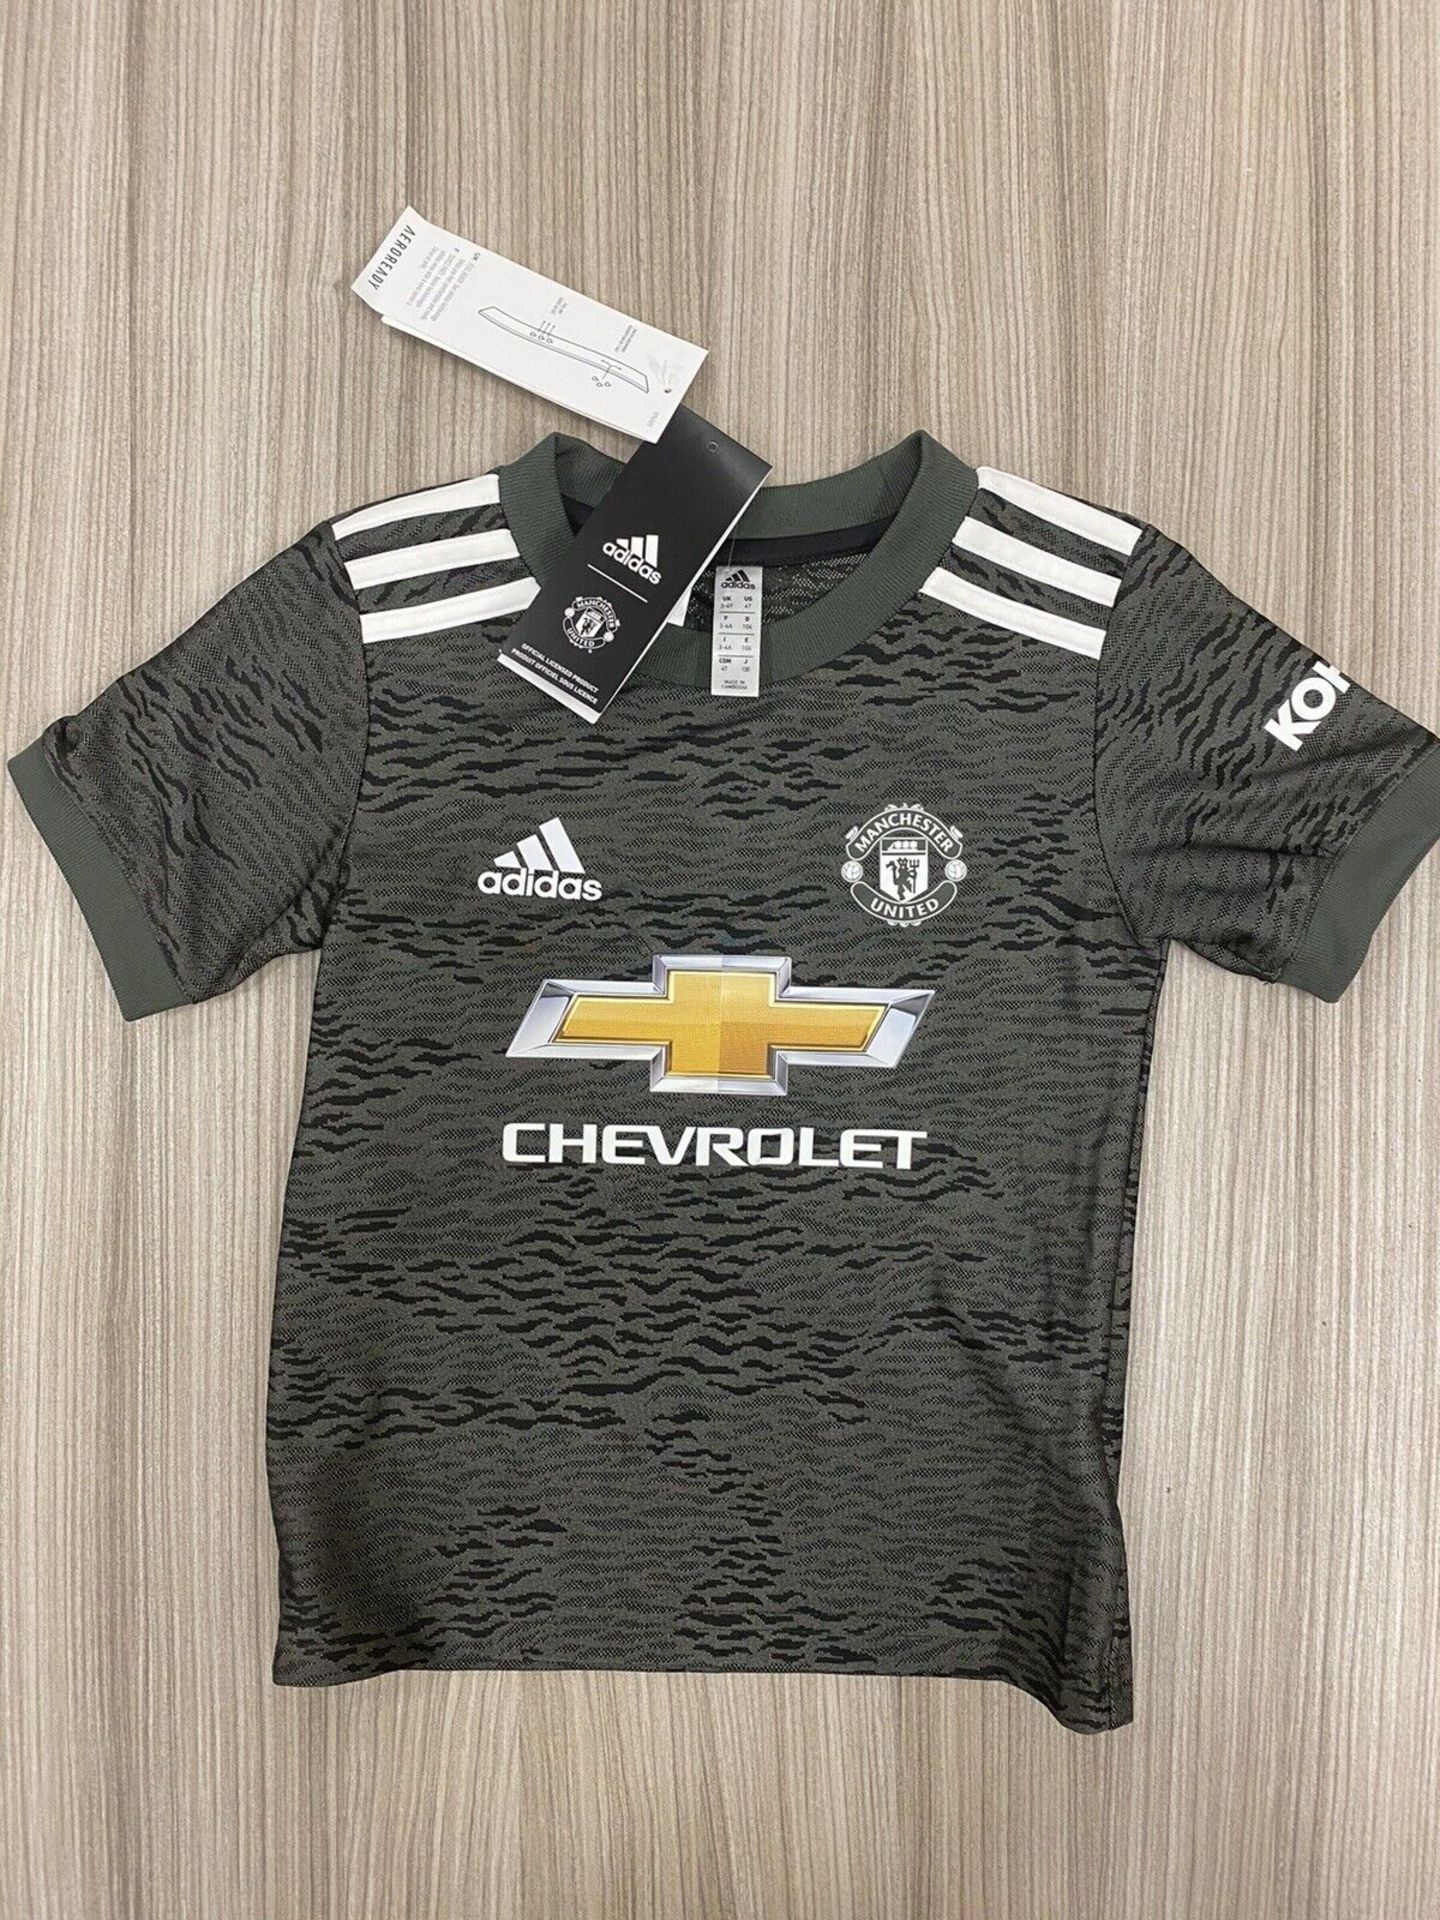 manchester united shirt 3-4years RRP £45